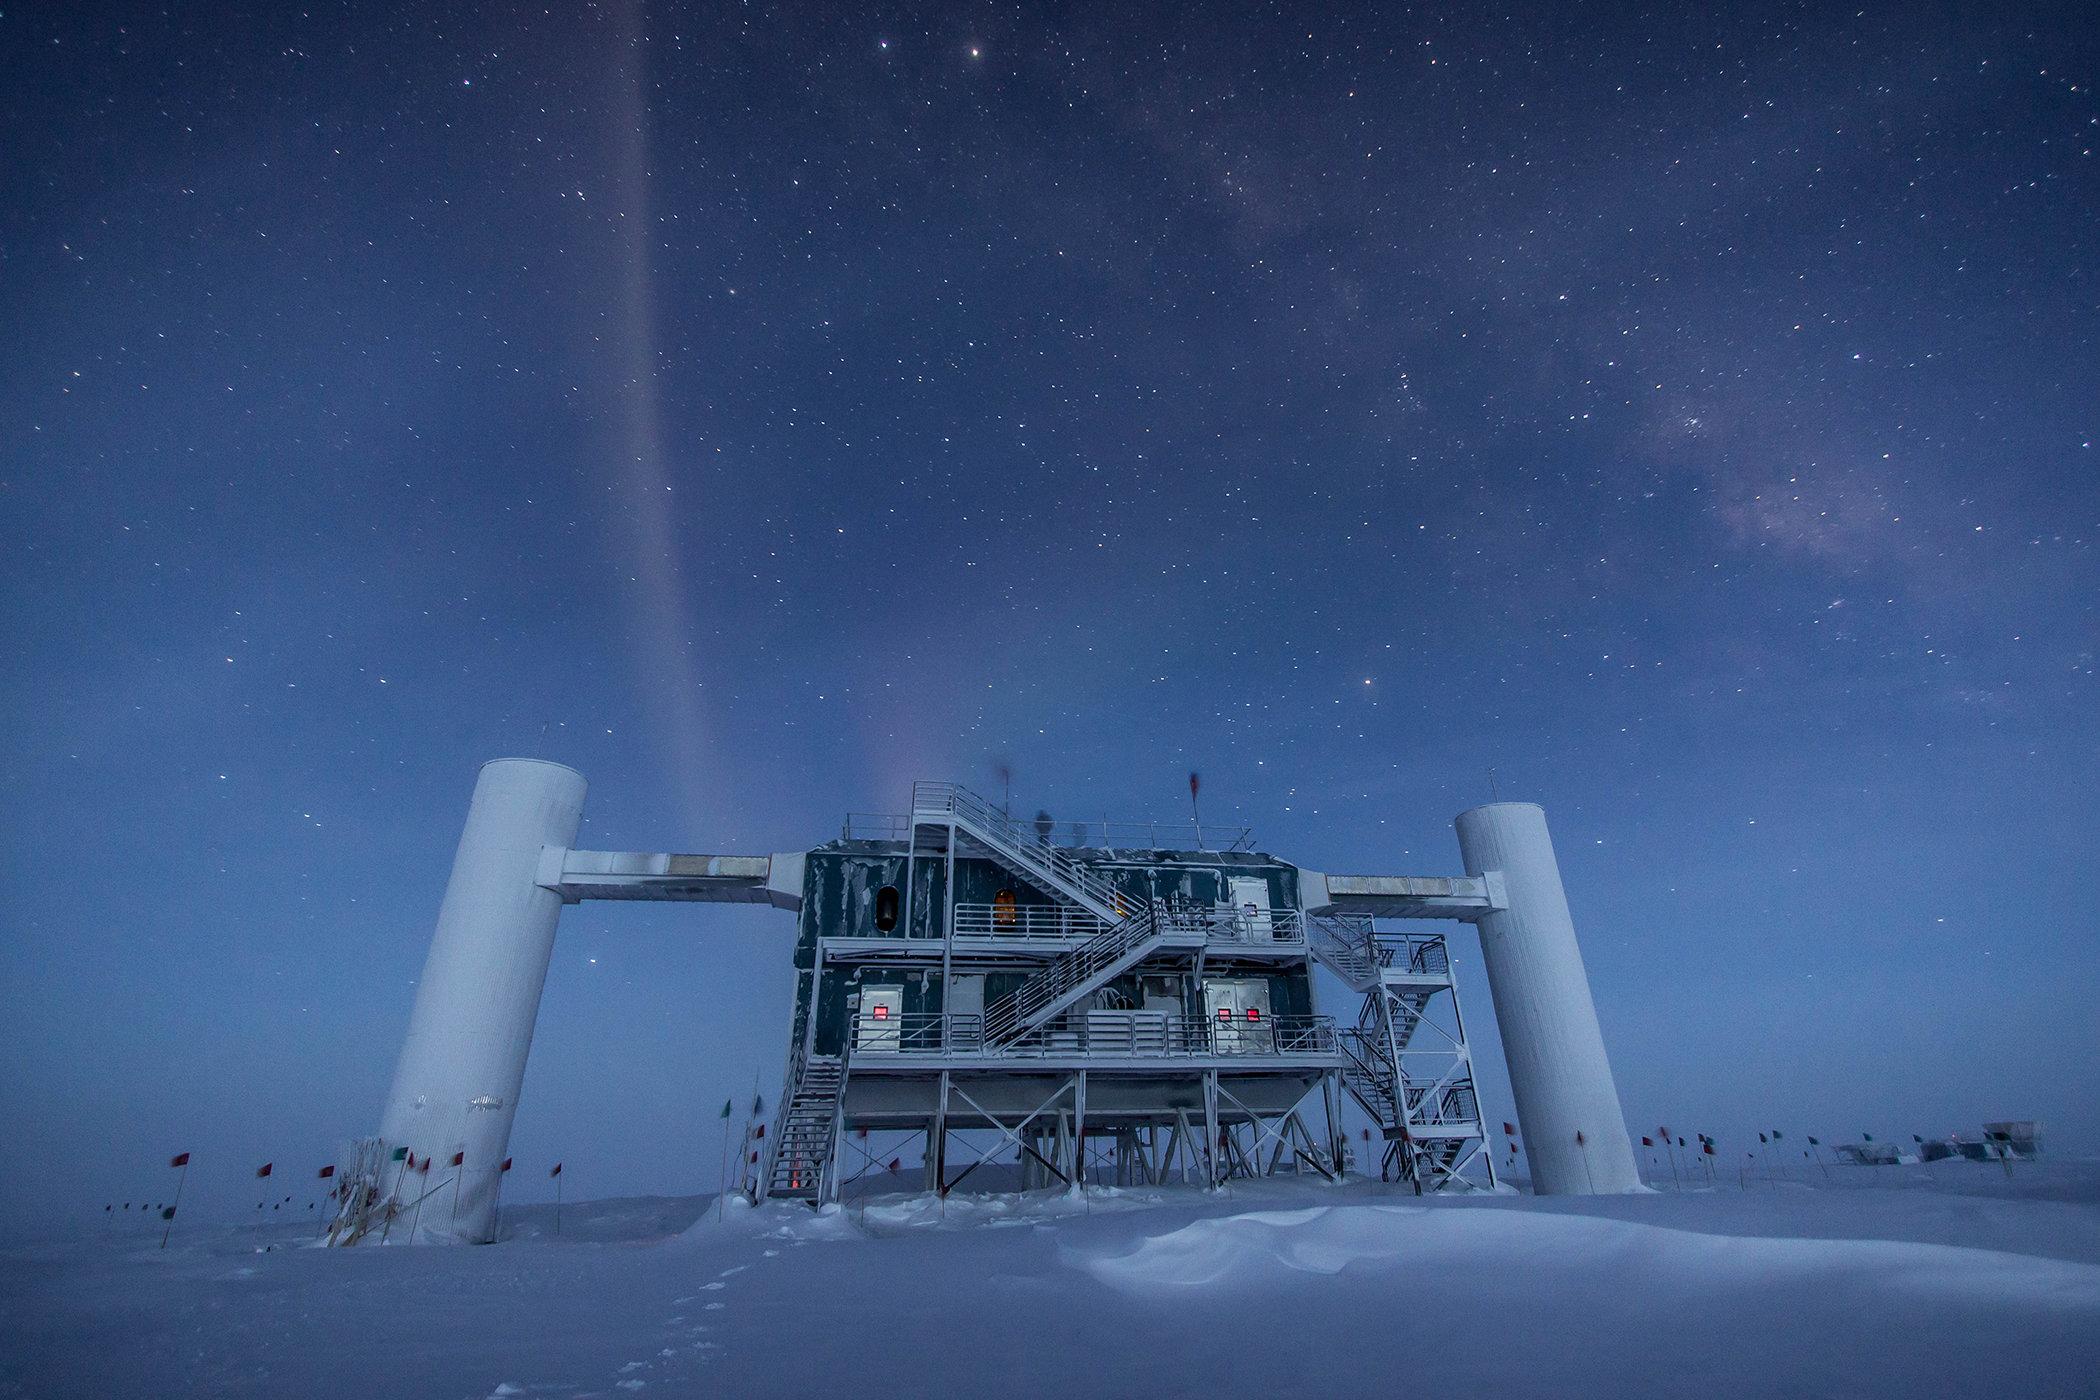 The surface facility for the IceCube experiment, which is located under nearly 1 mile (1.6 kilometers) of ice in Antarctica. IceCube suggests ghostly neutrinos don't exist, but a new experiment says they do.